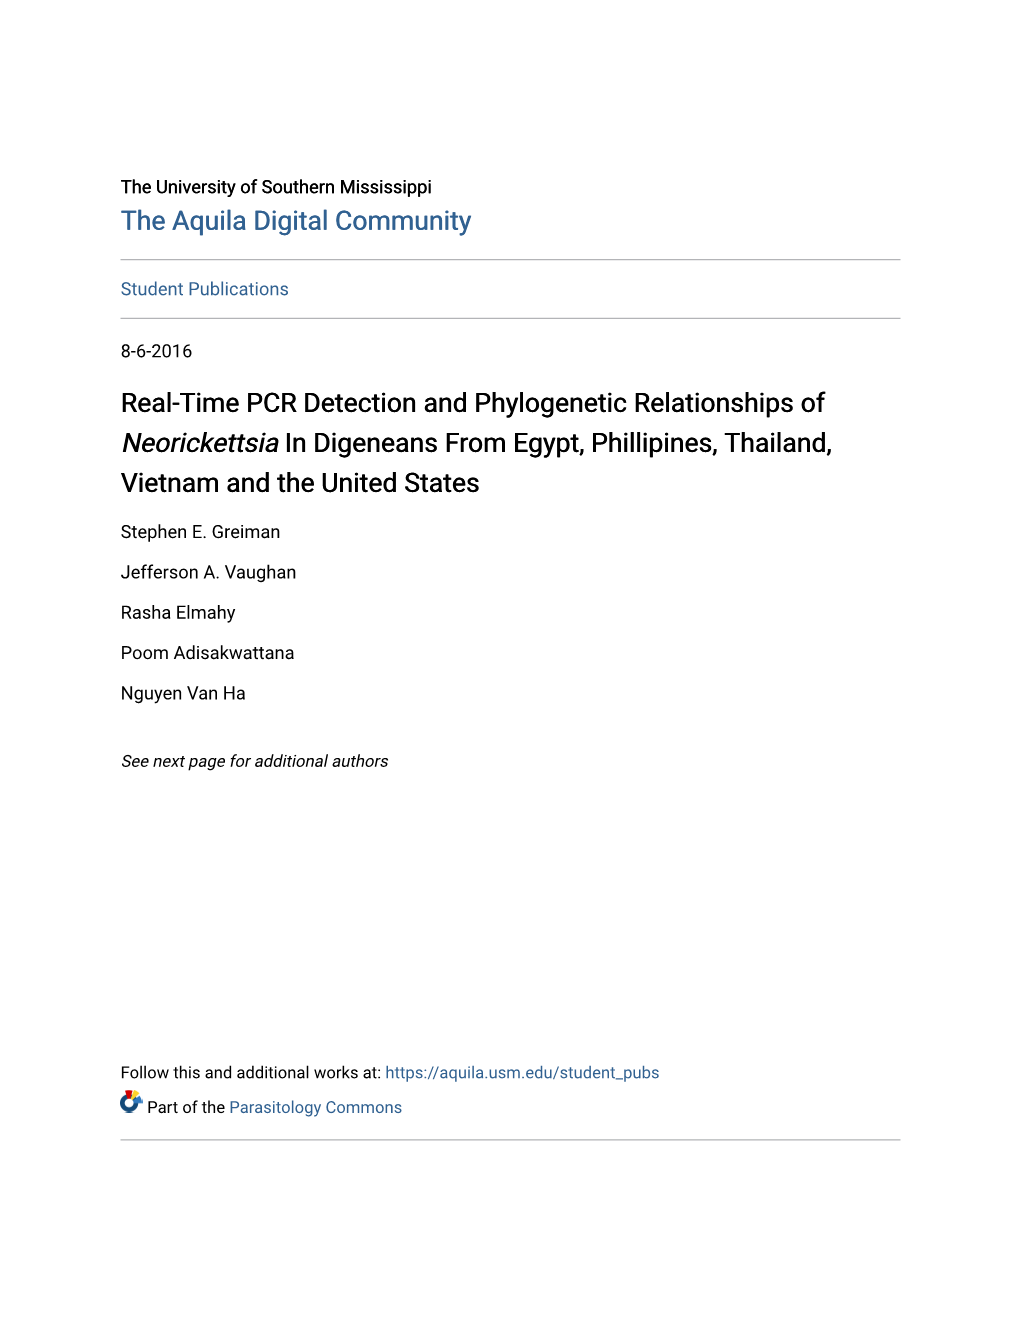 Real-Time PCR Detection and Phylogenetic Relationships of &lt;I